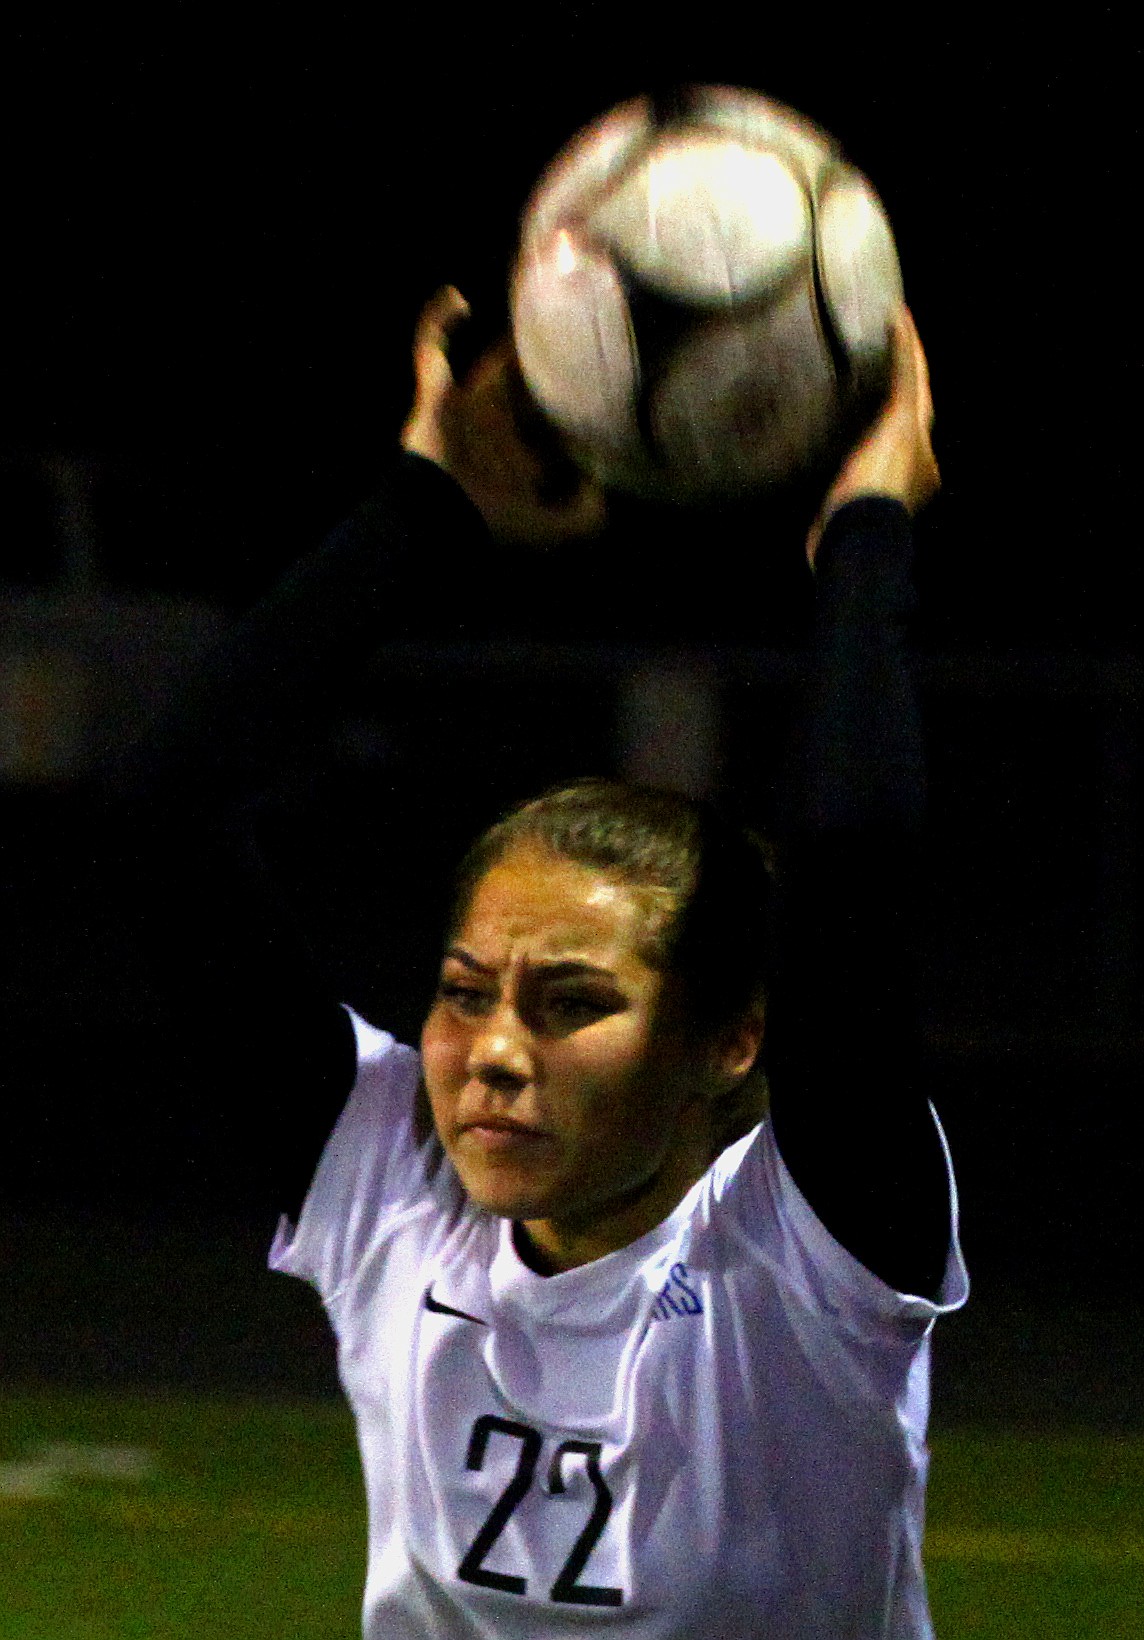 Rodney Harwood/Columbia Basin Herald
Warden's Kennedy Kilmer (22) winds up to throw the ball in during the second half of Thursday's SCAC district championship game against La Salle. The Lightning won 8-0 and will go into the 1A state tournament as the No. 1 seed from the SCAC.